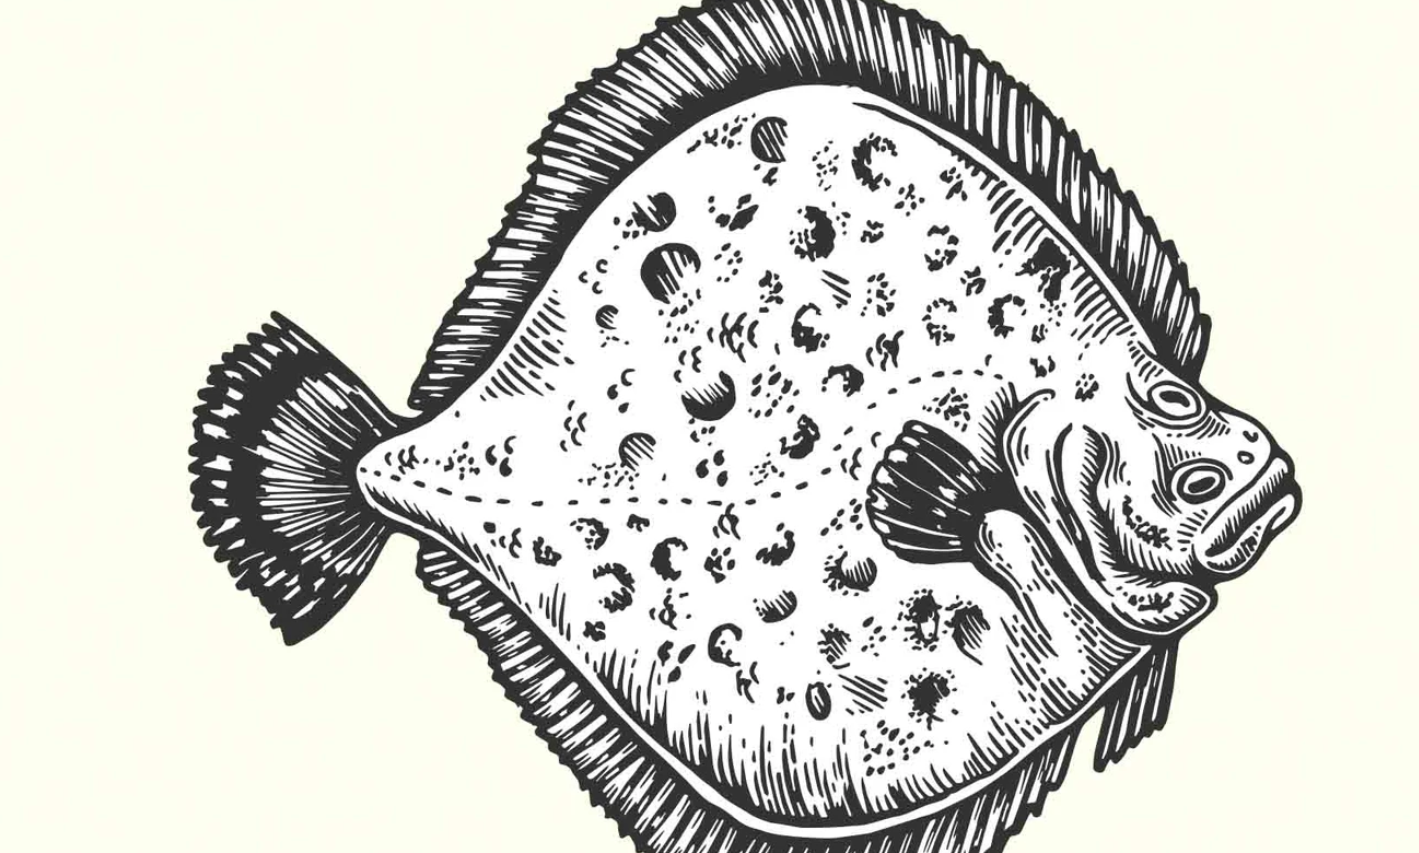 RECIPE: GRILLED TURBOT STEAK WITH TARTARE SAUCE